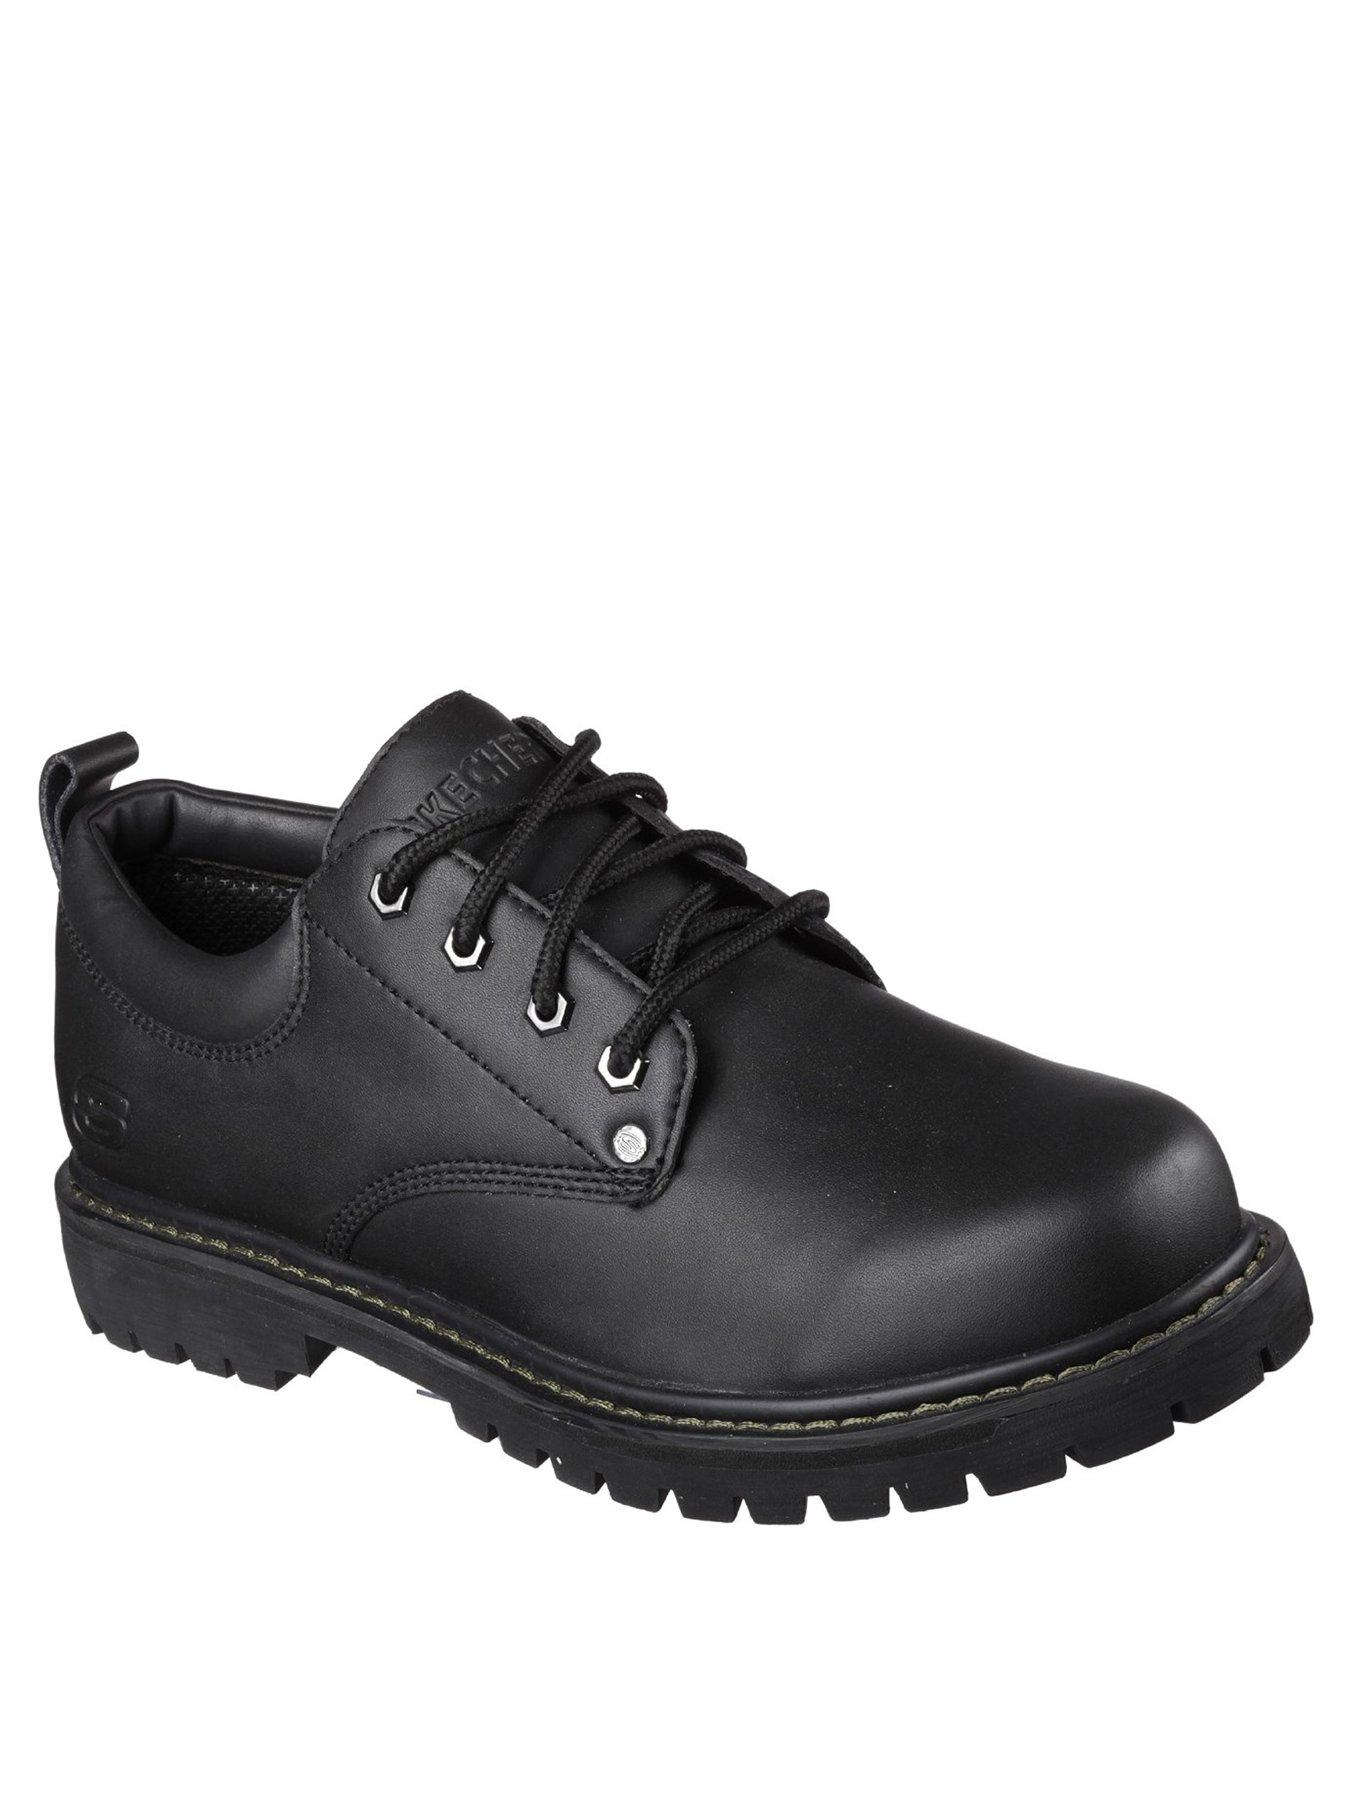 Skechers Tom Cats Utility Leather Shoes Black | very.co.uk